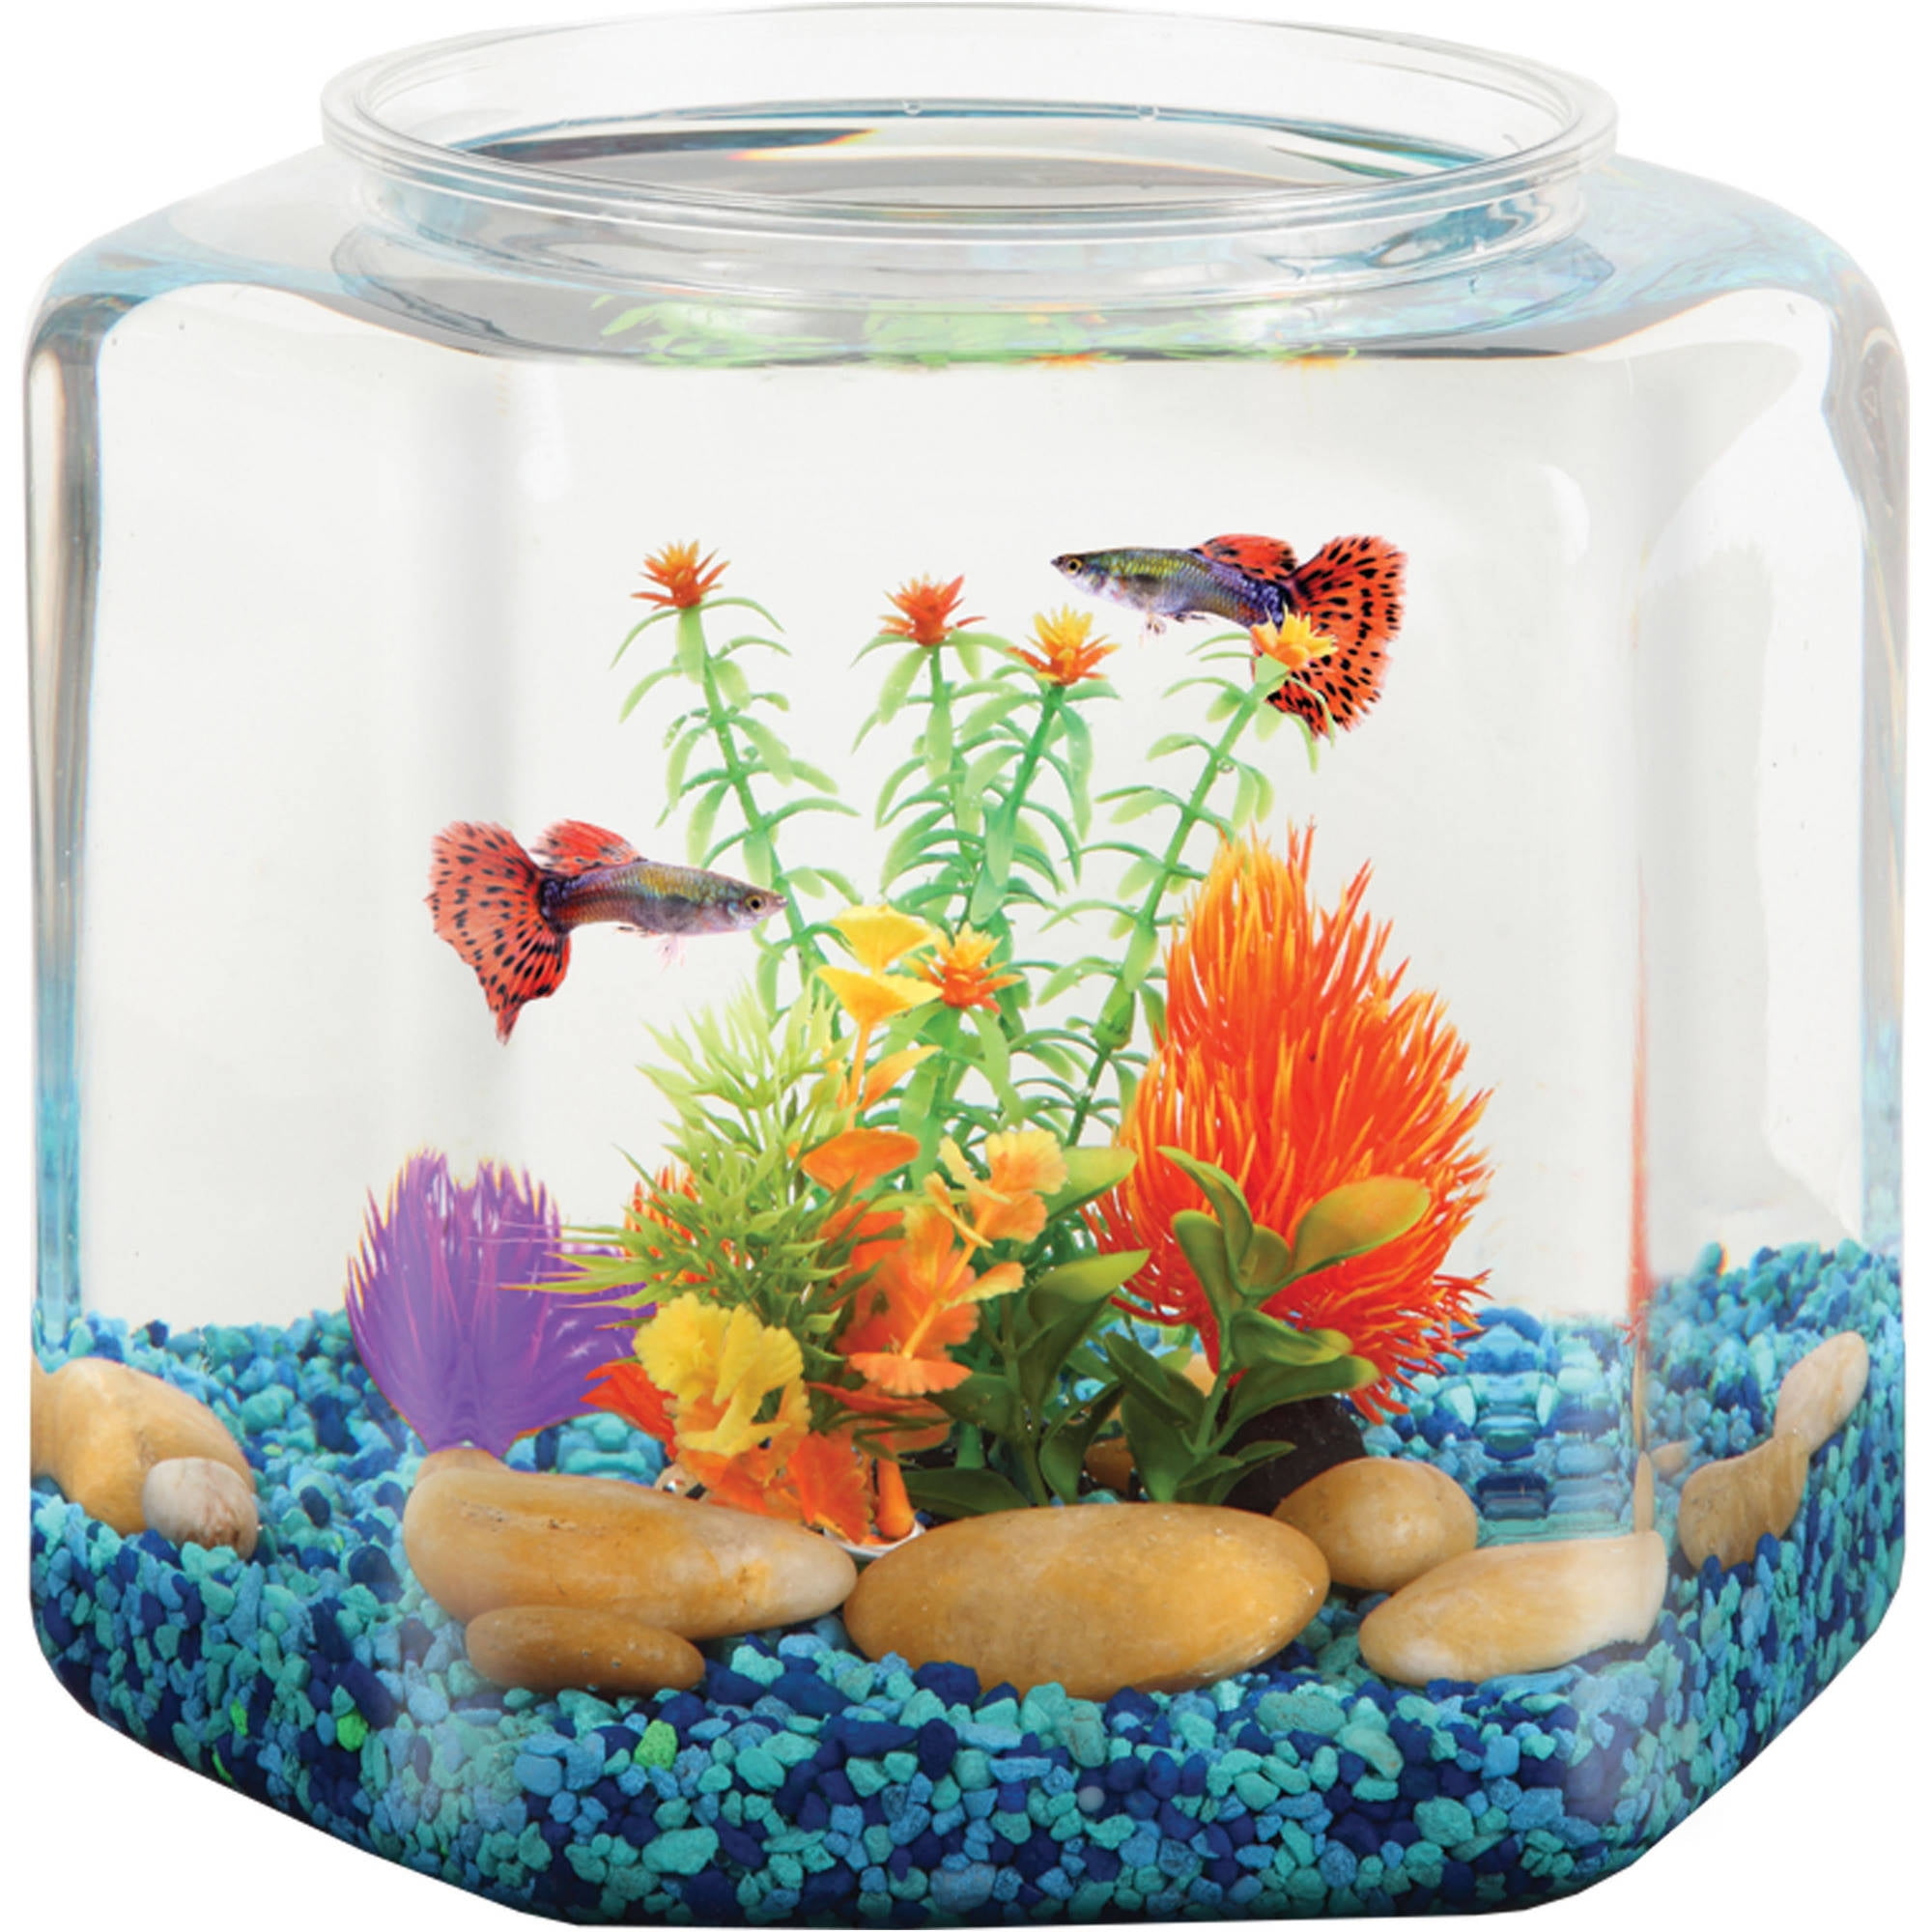 Hawkeye 2-Gallon Hexagon Fish Bowl, Ideal for Wedding Receptions,  Centerpieces, and Party Events